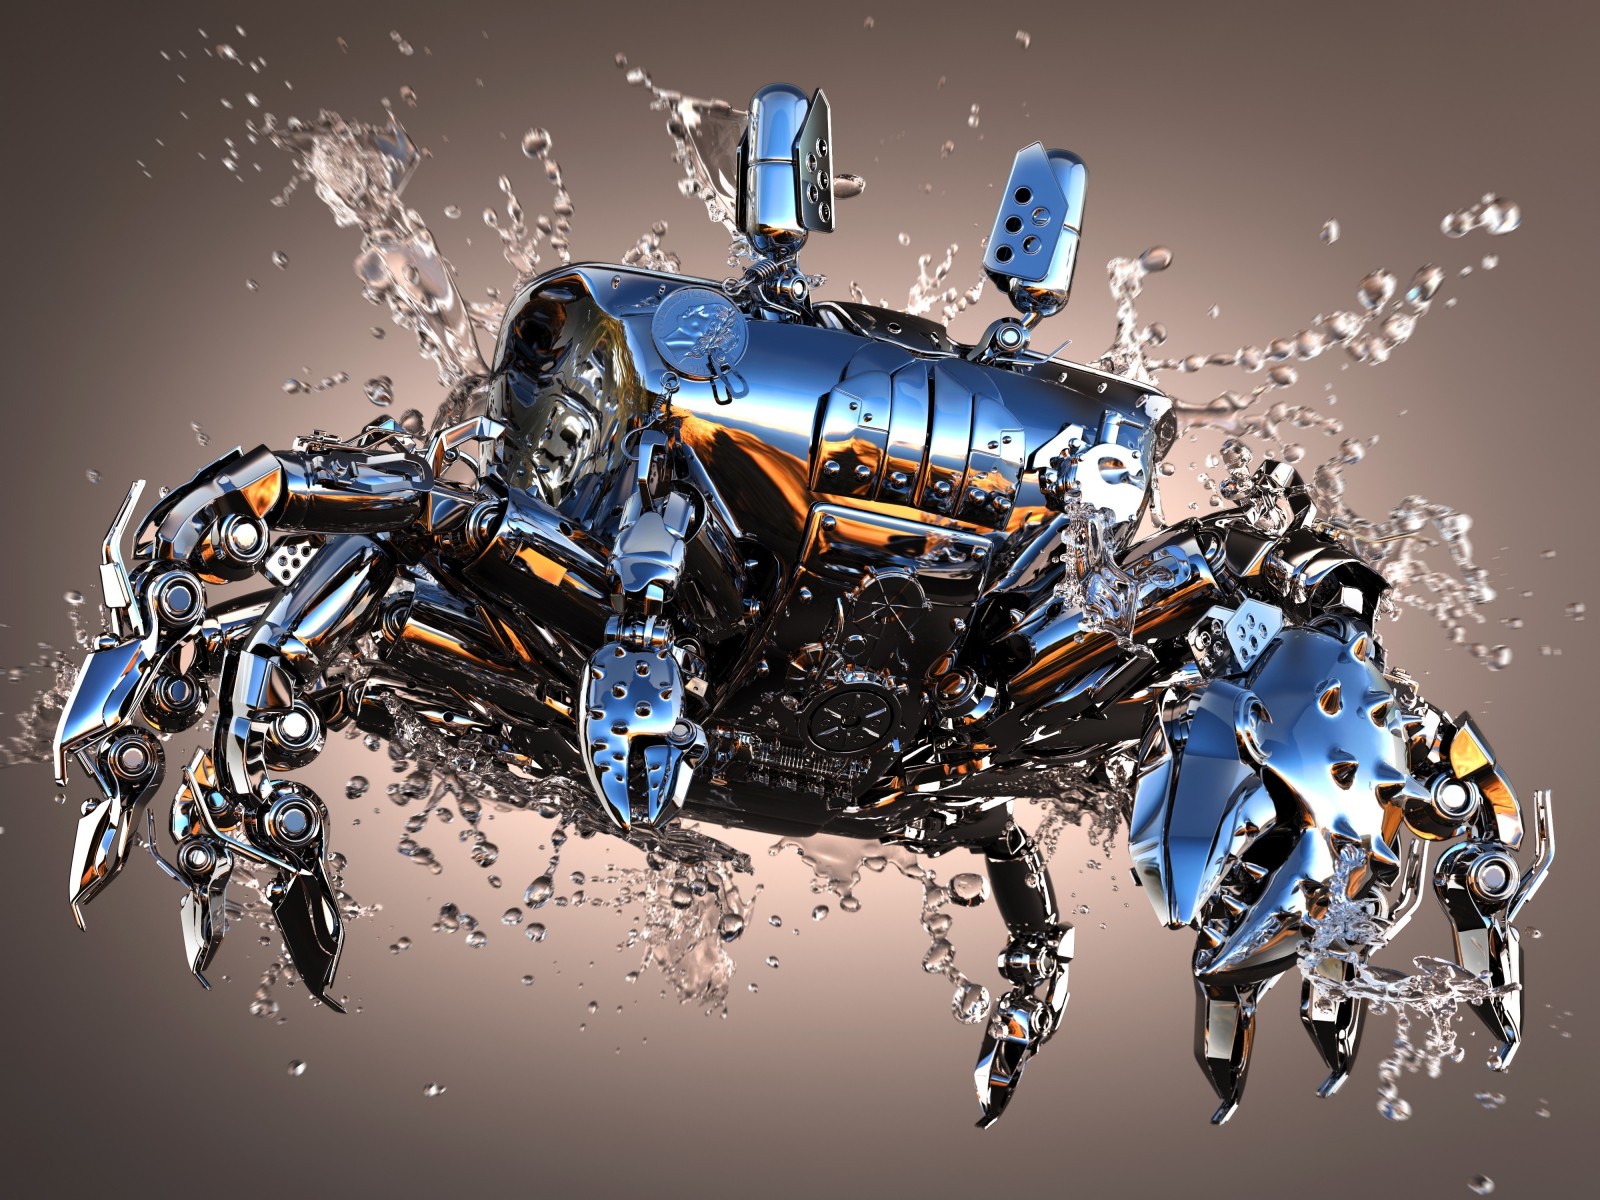 General 1600x1200 digital art animals CGI splashes metal water drops simple background crabs reflection claws